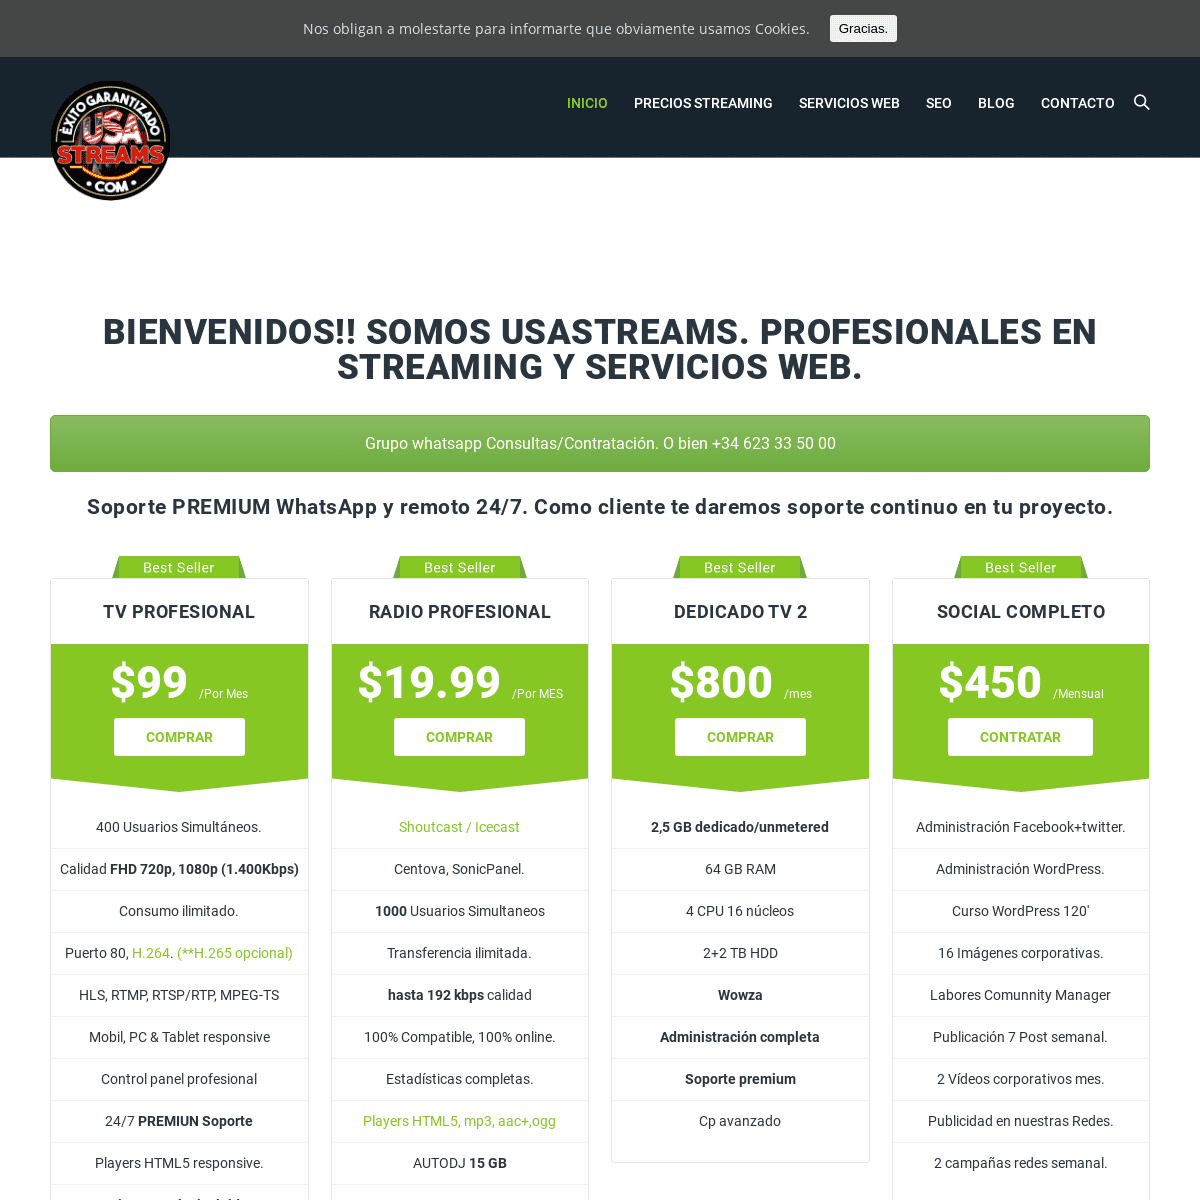 A complete backup of https://usastreams.com